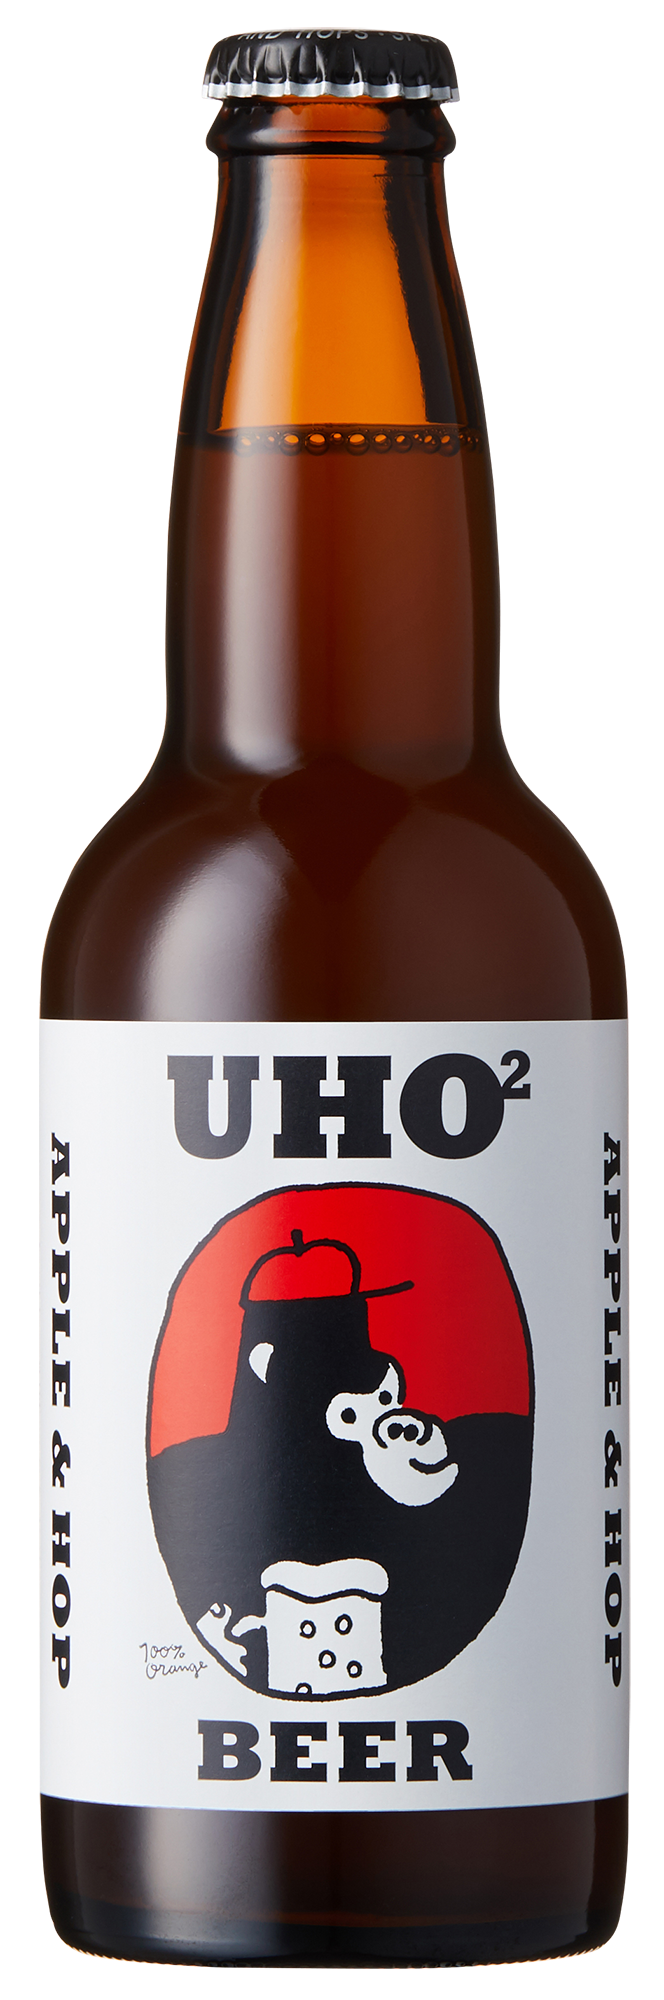 UHO UHO BEER（ウホウホビール）<img class='new_mark_img2' src='https://img.shop-pro.jp/img/new/icons1.gif' style='border:none;display:inline;margin:0px;padding:0px;width:auto;' />